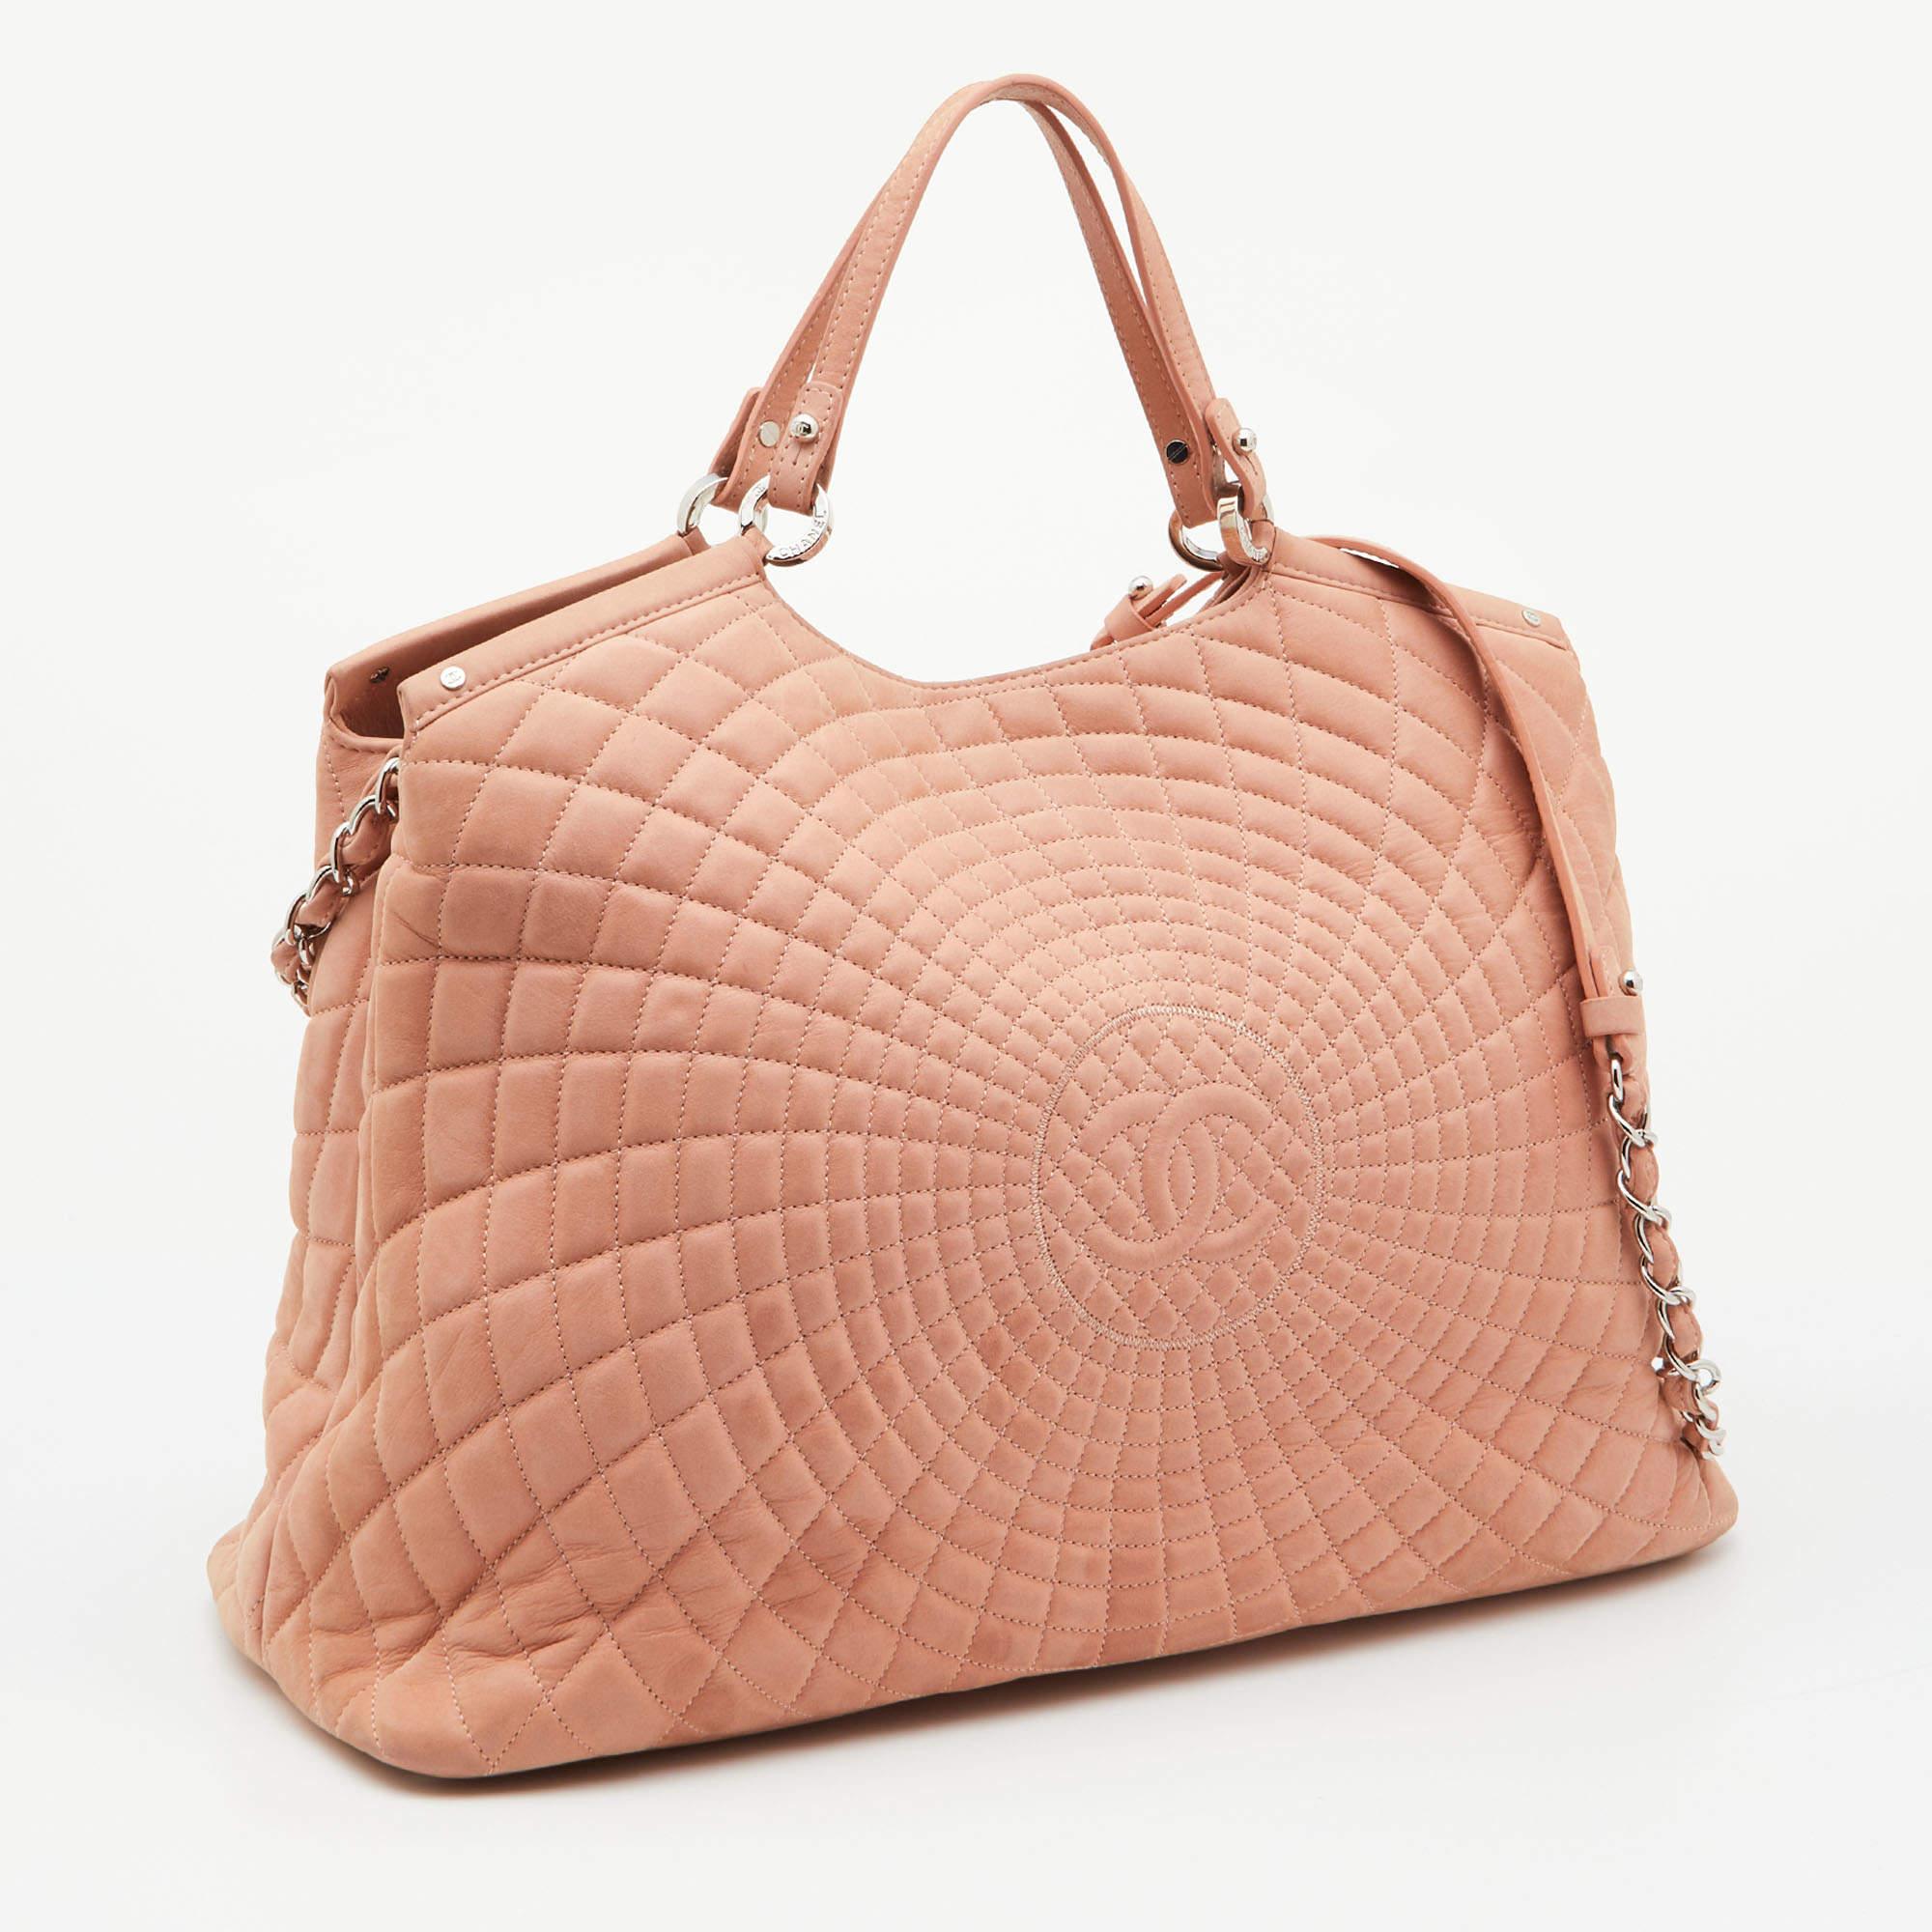 Women's Chanel Light Pink Quilted Iridescent Leather Large Sea Hit Tote